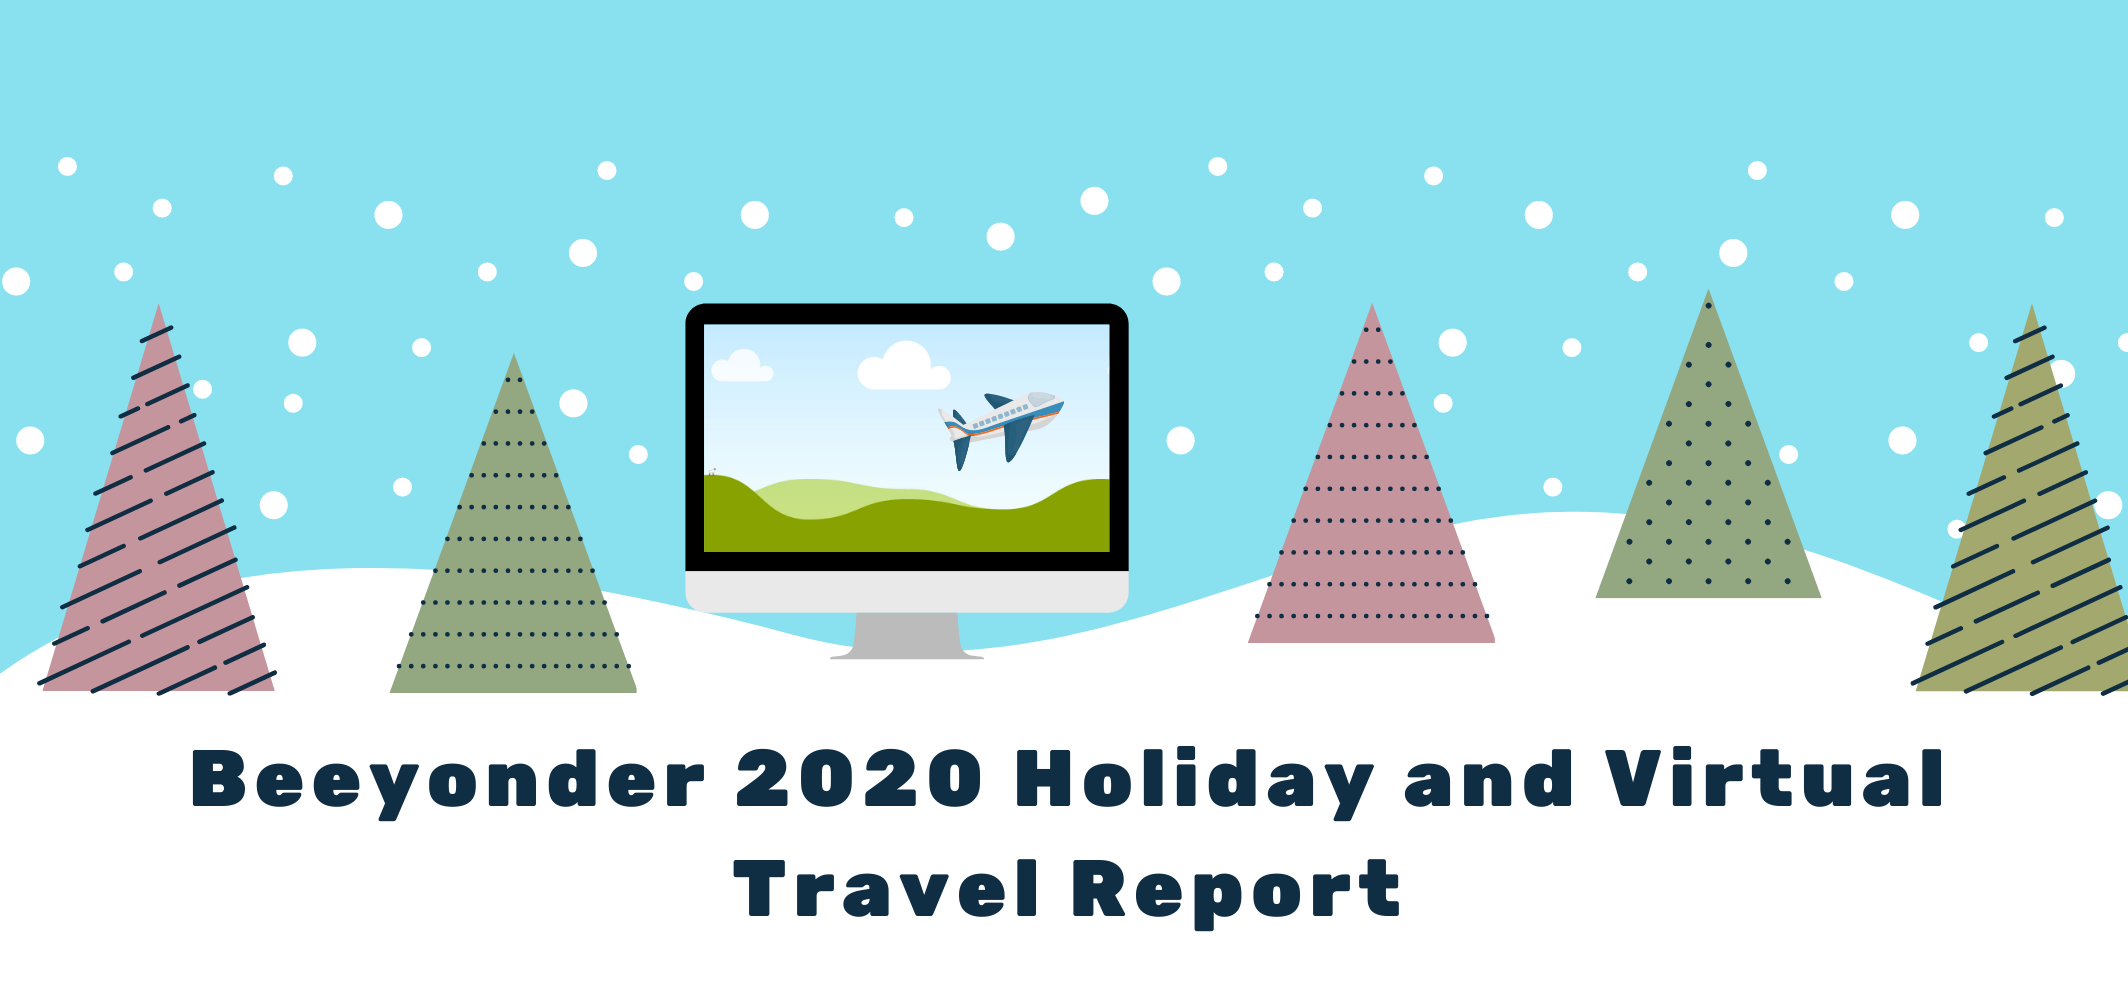 Beeyonder 2020 Holiday and Virtual Travel Report